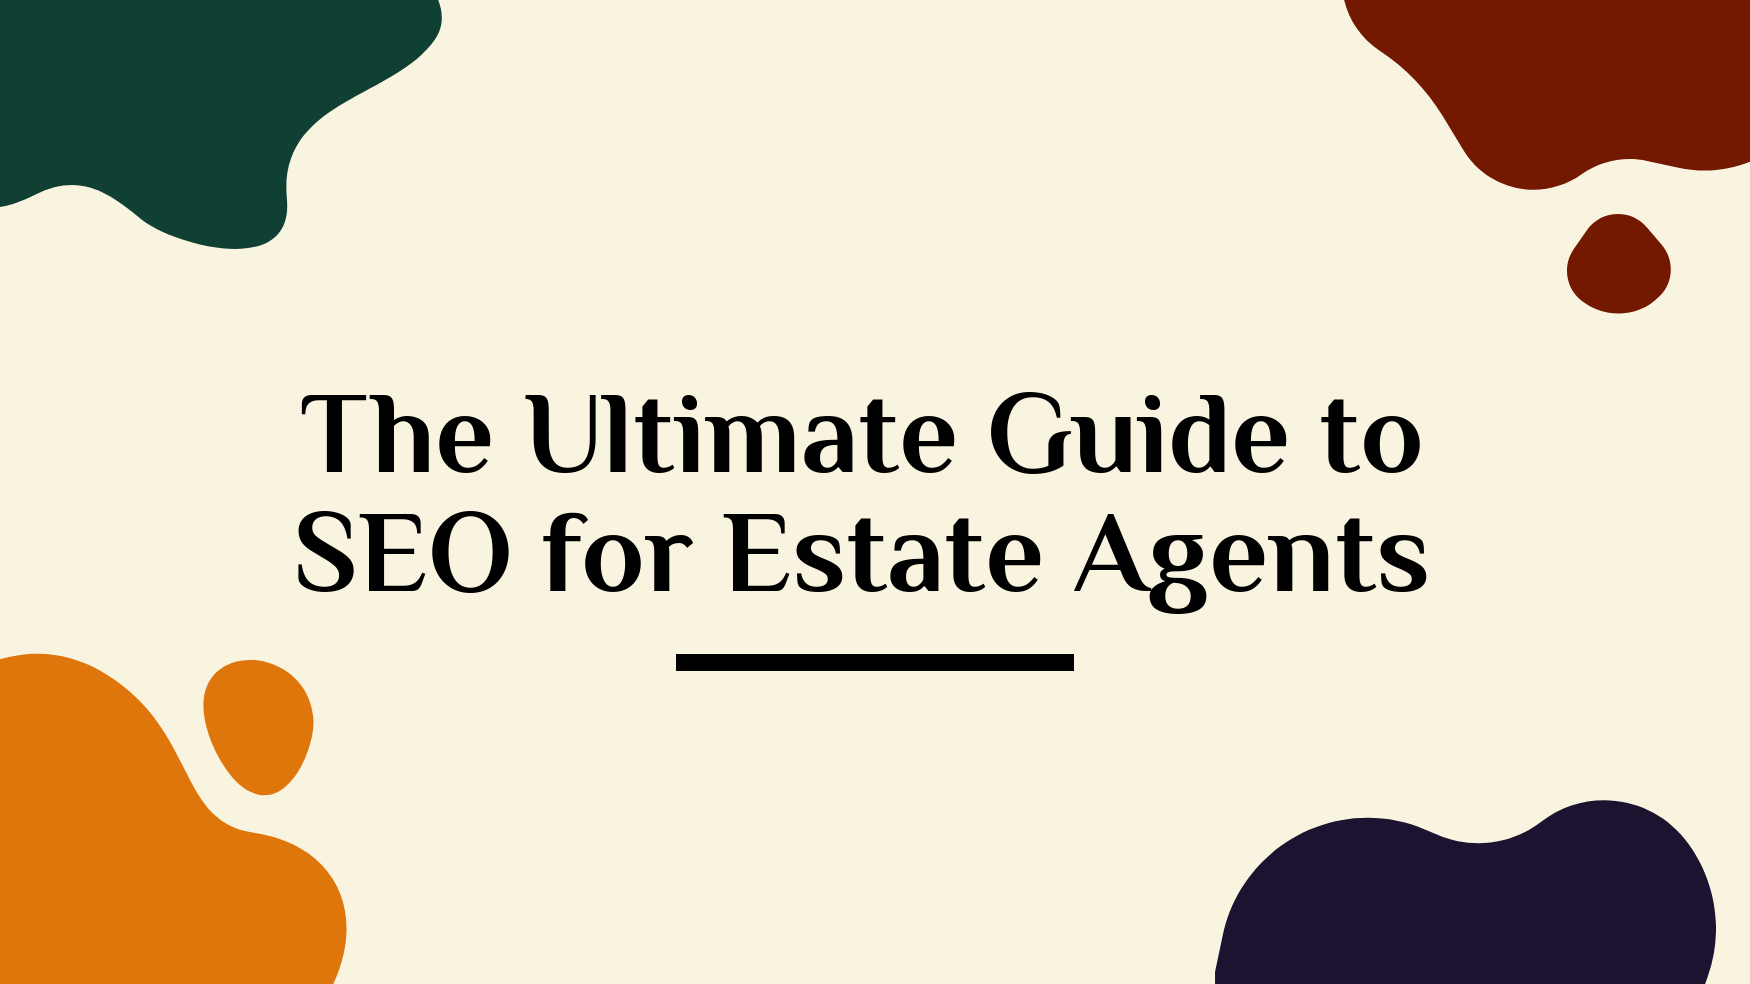 The Ultimate Guide to SEO for Estate Agents